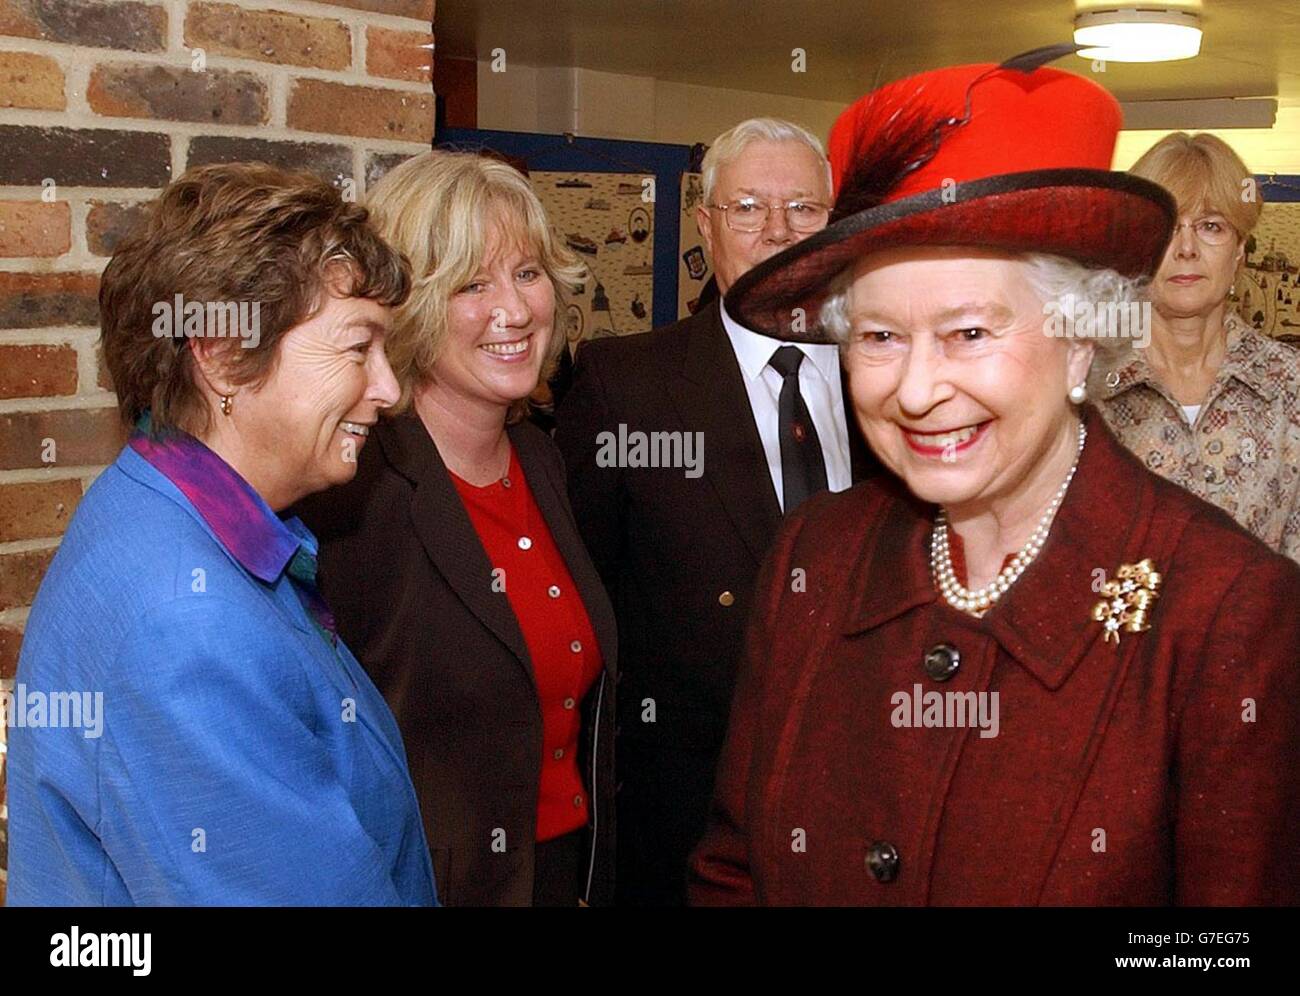 The Queen smiles as she turns away from Jacky Froggatt (left) the Headmistress of Harwich School, in Harwich, Essex. Stock Photo